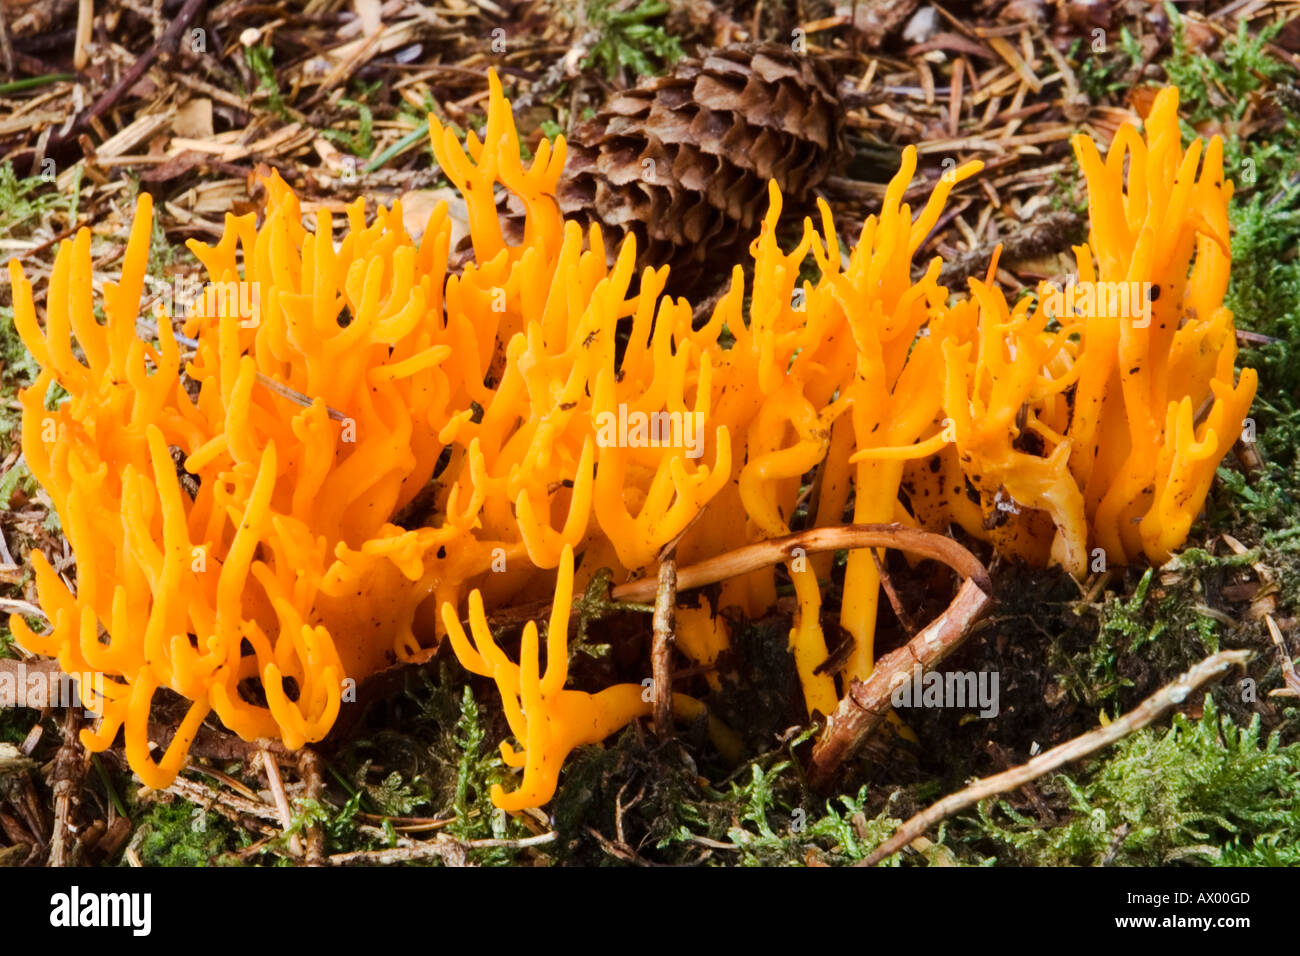 A coral jelly antler fungus growing on the forest floor surrounded by moss Stock Photo